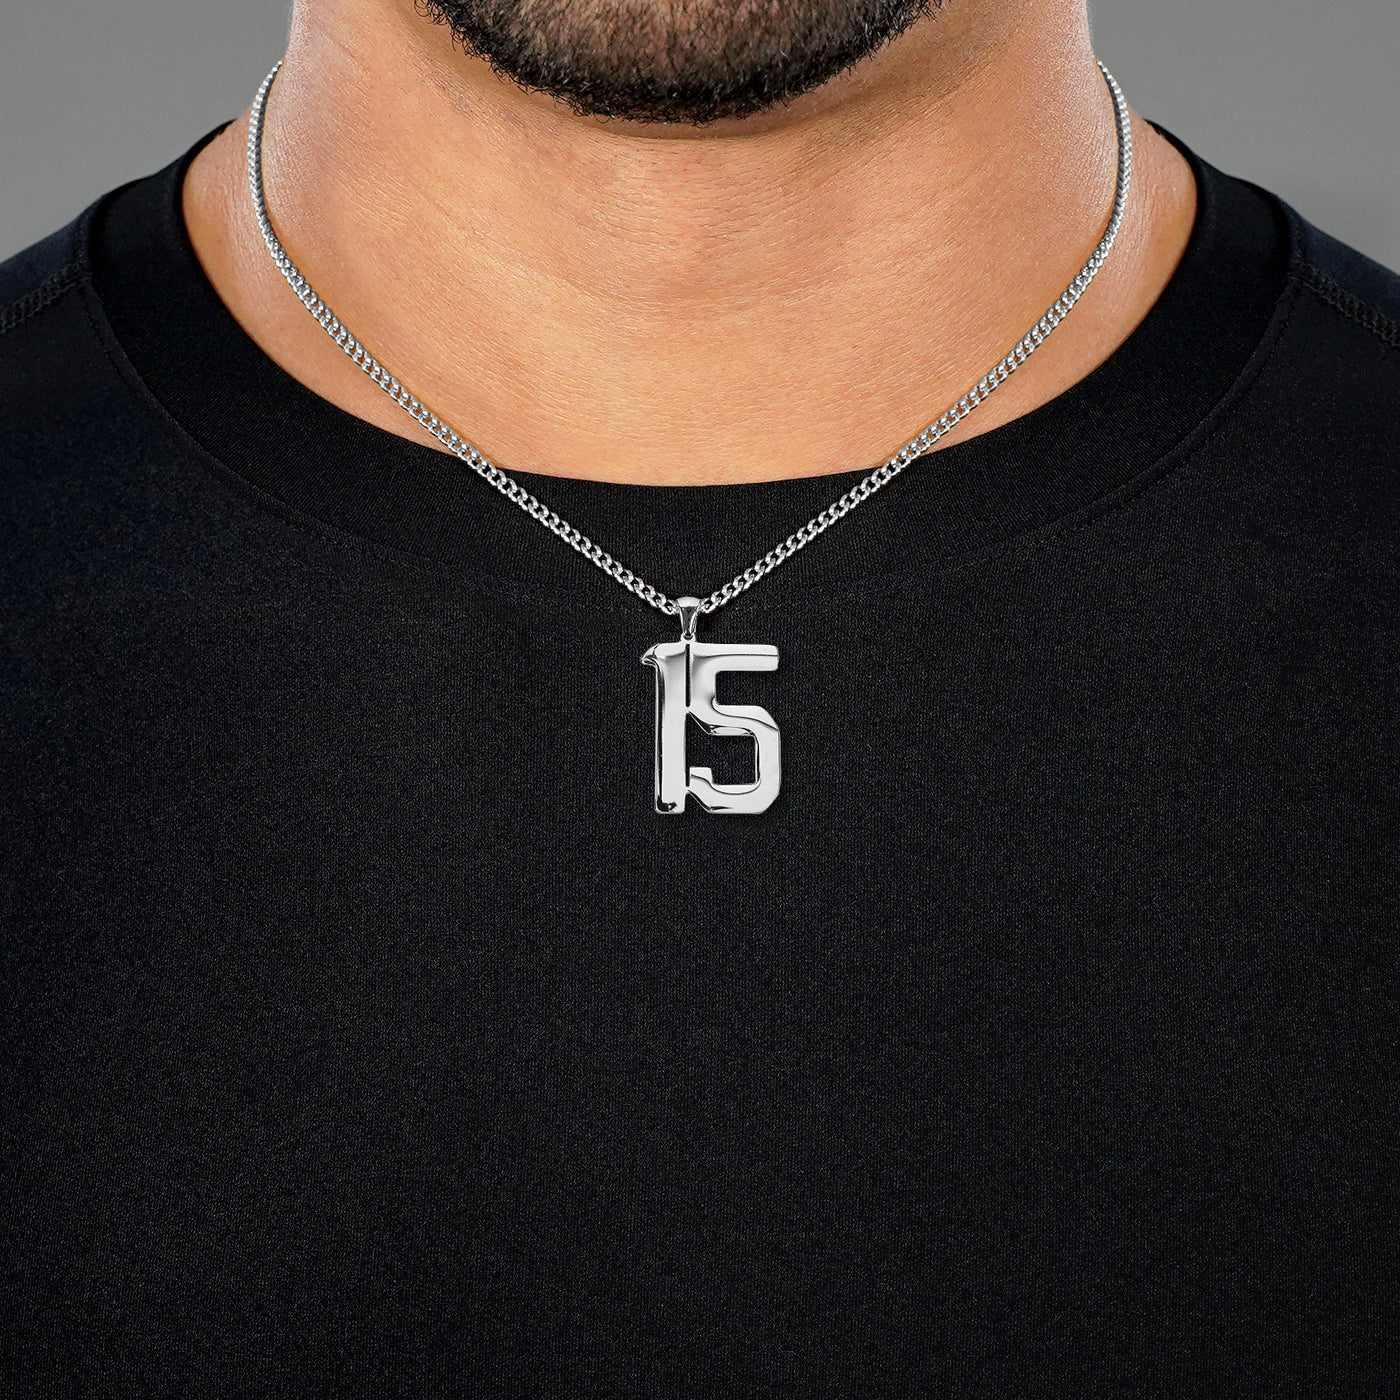 15 Number Pendant with Chain Necklace - Stainless Steel